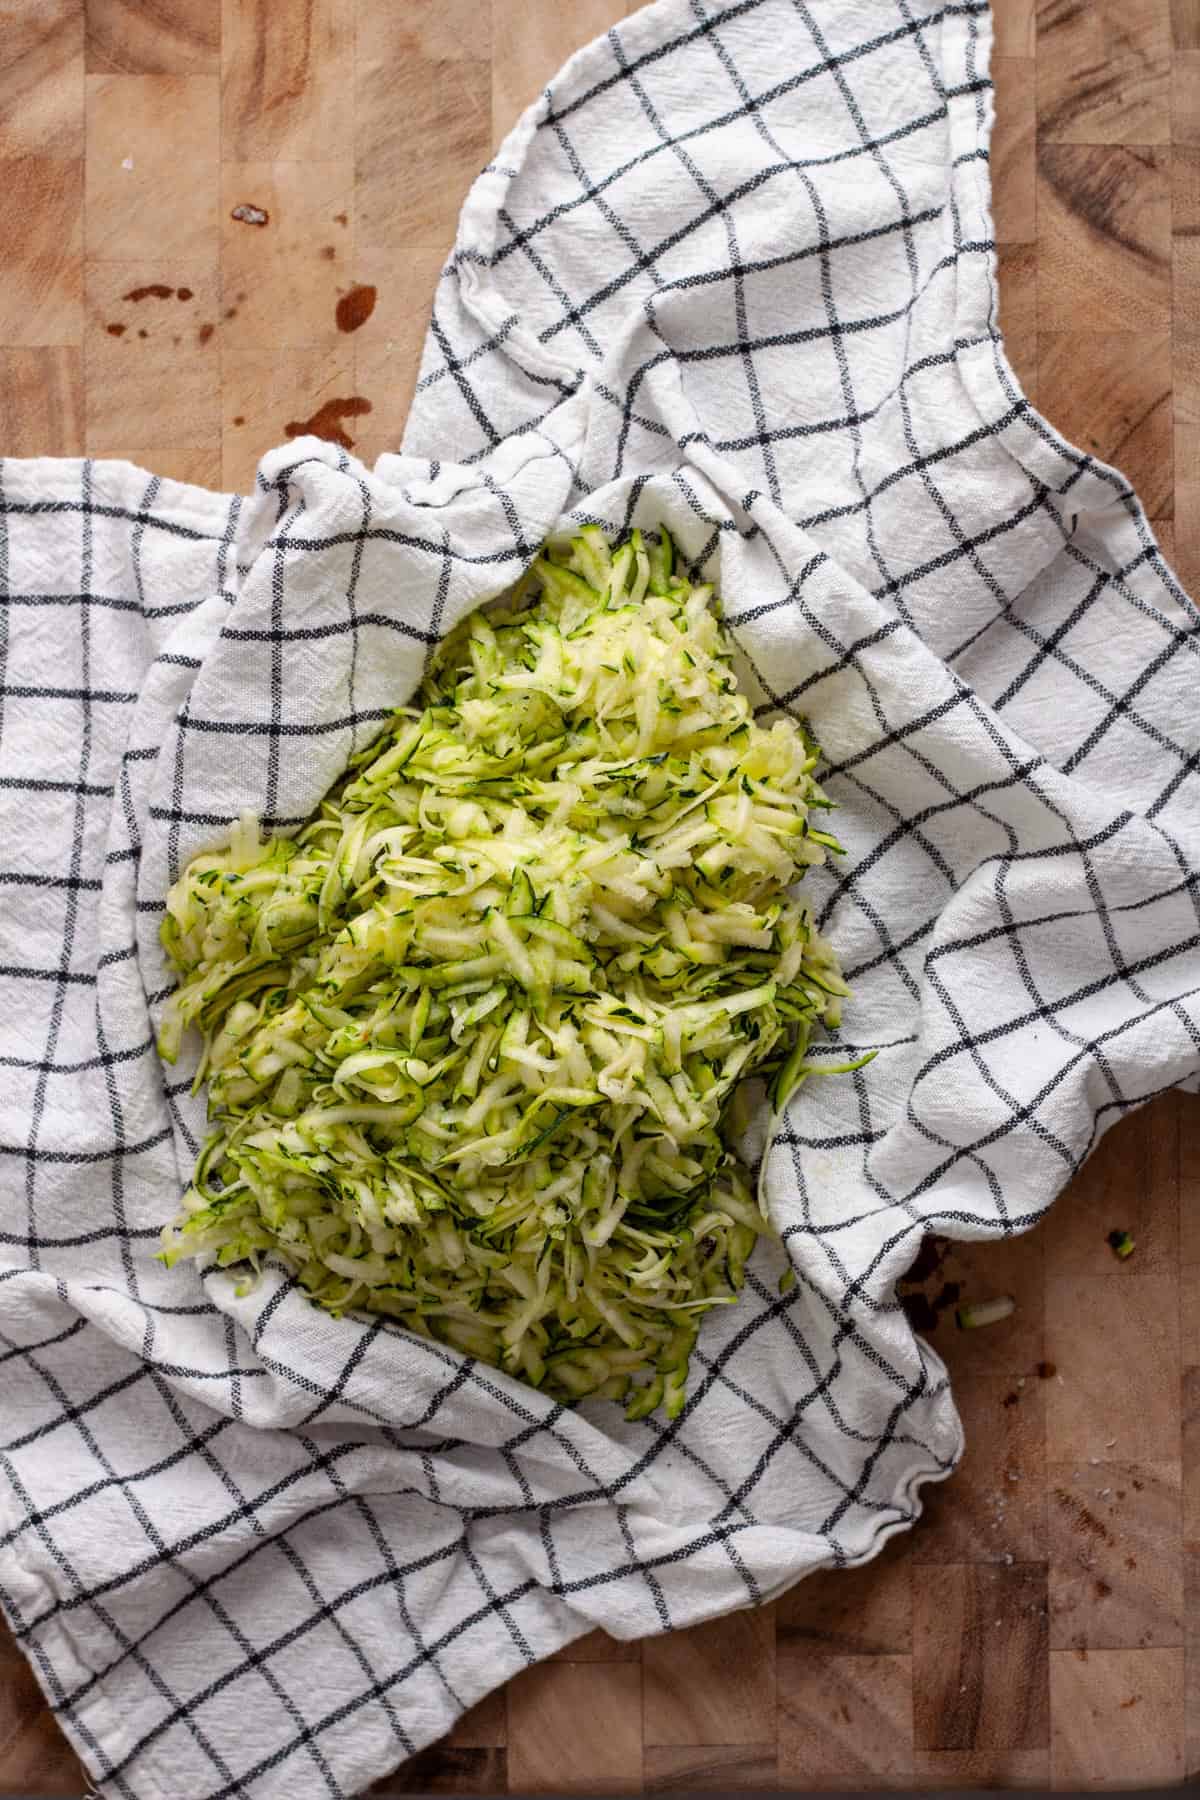 Grated zucchini on a clean kitchen towel getting ready to be rung dry.